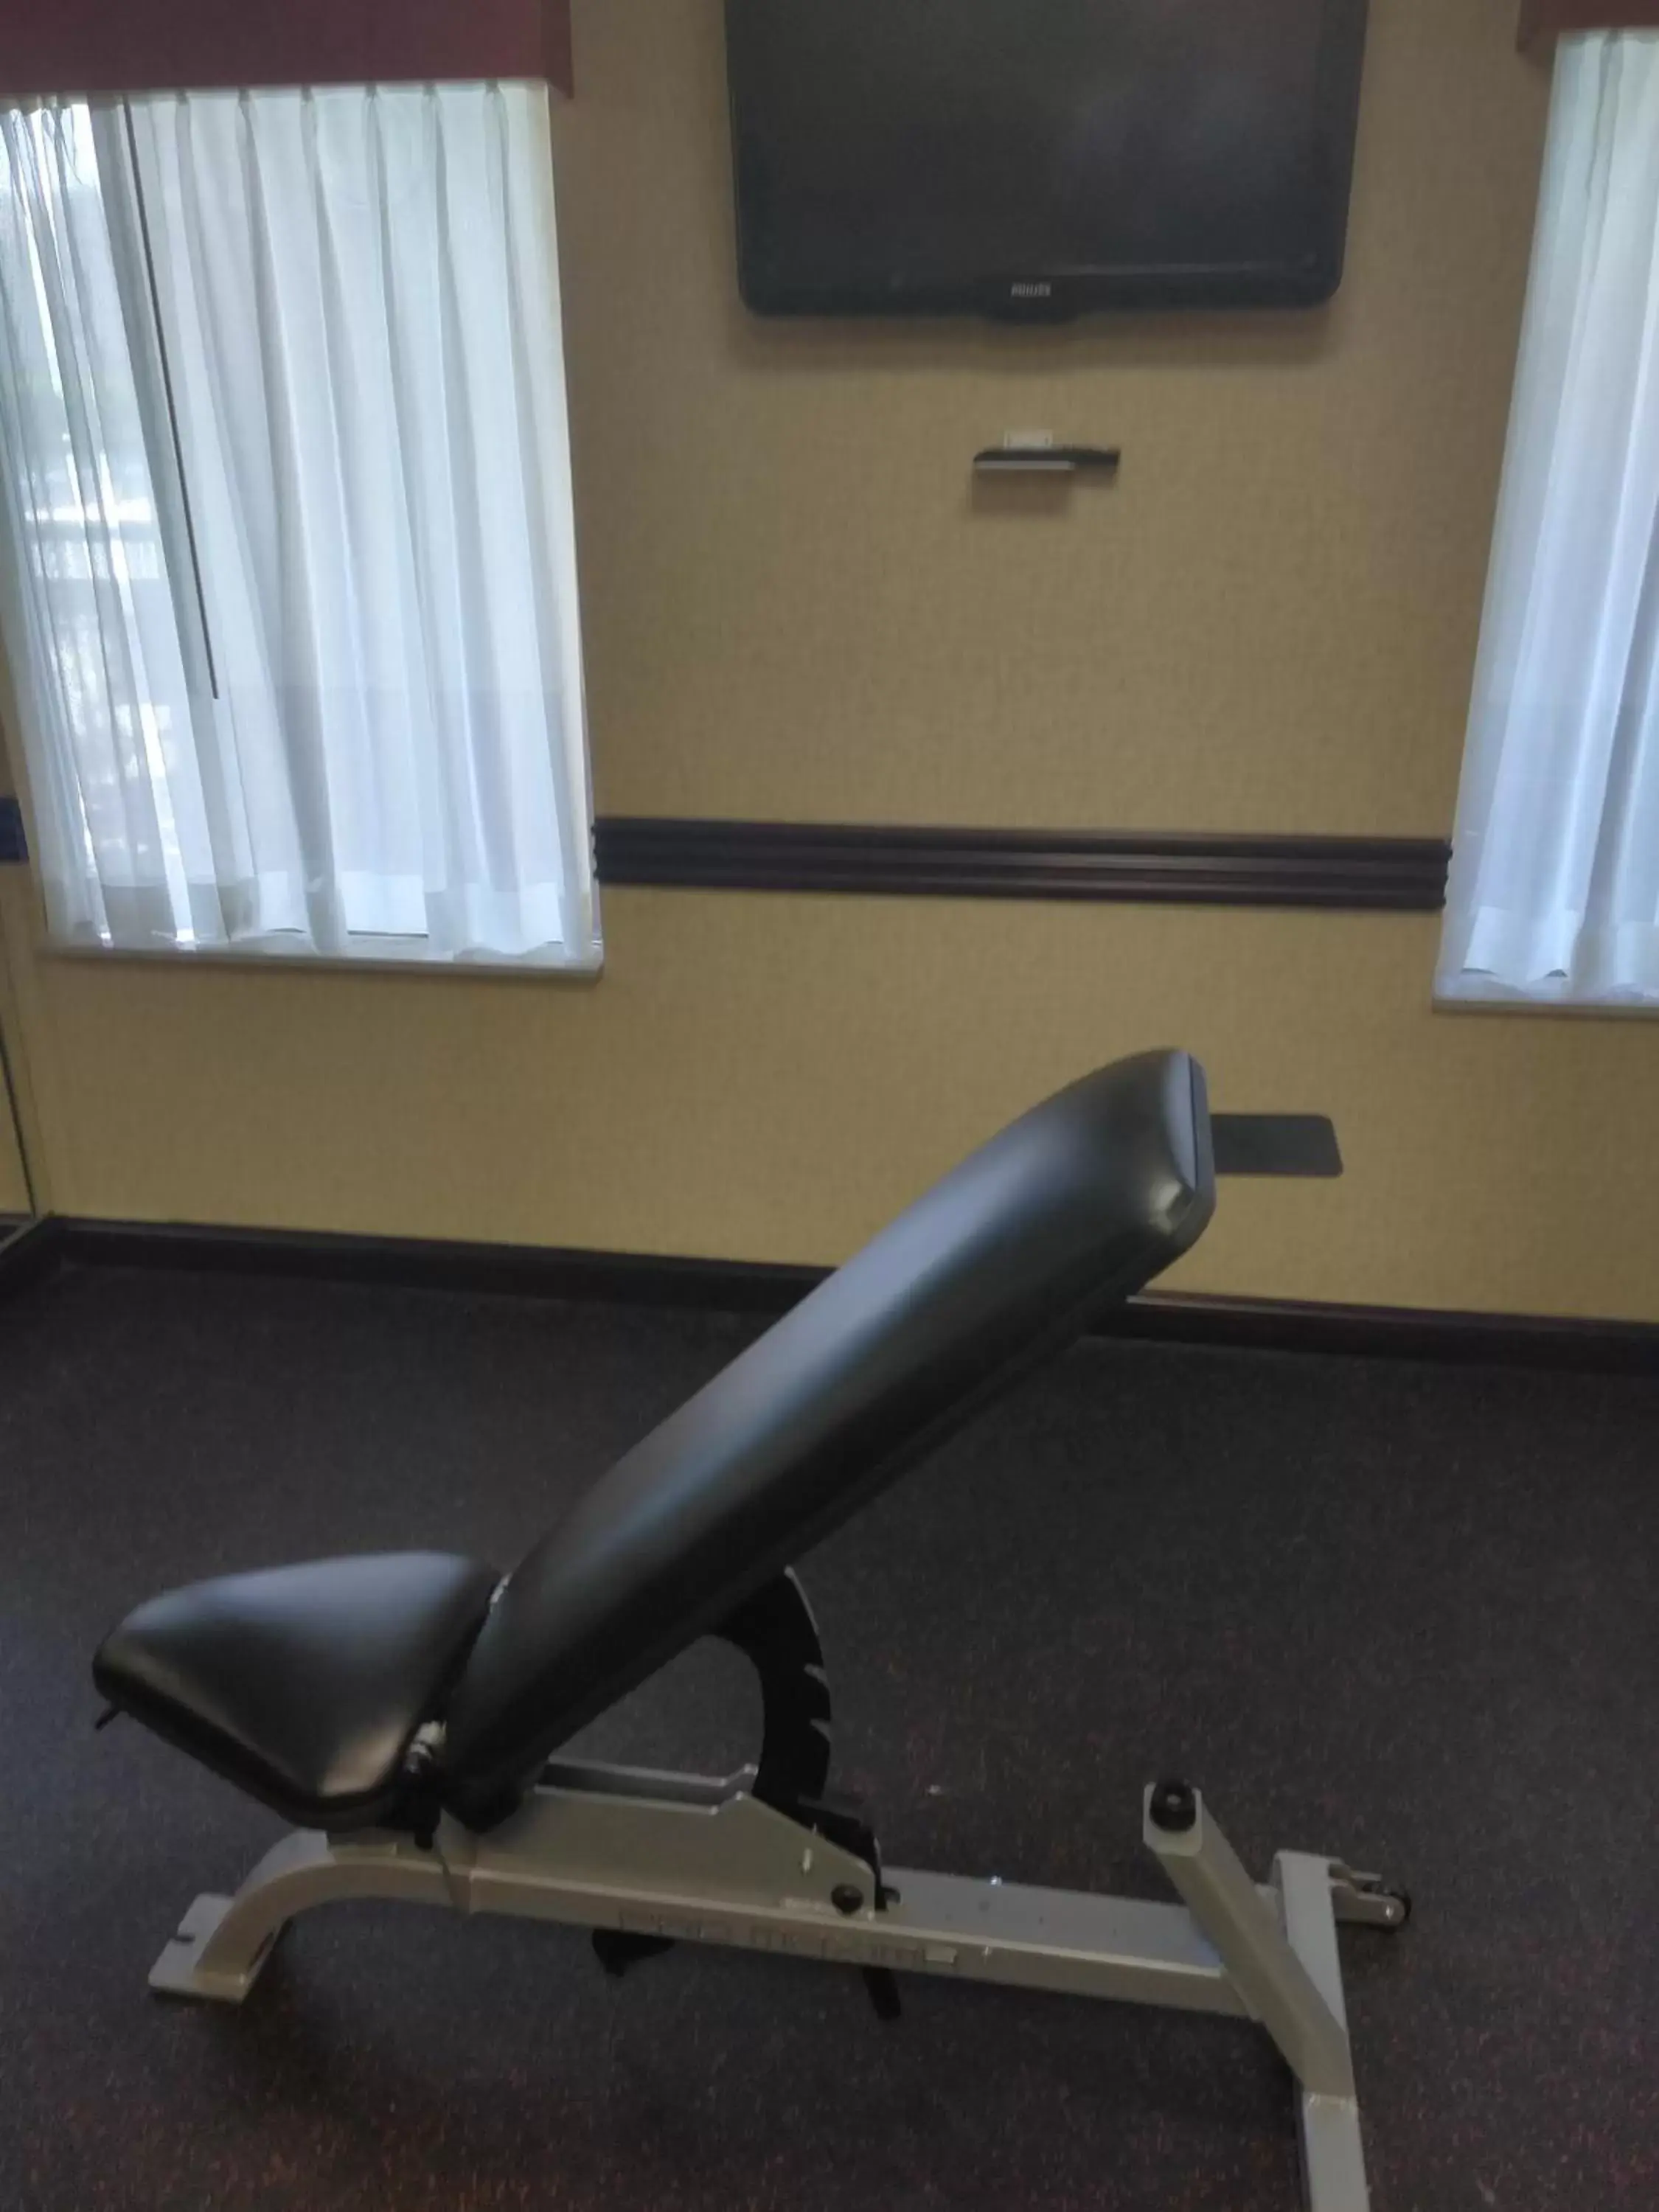 Fitness centre/facilities, Fitness Center/Facilities in Baymont by Wyndham Madison Heights Detroit Area